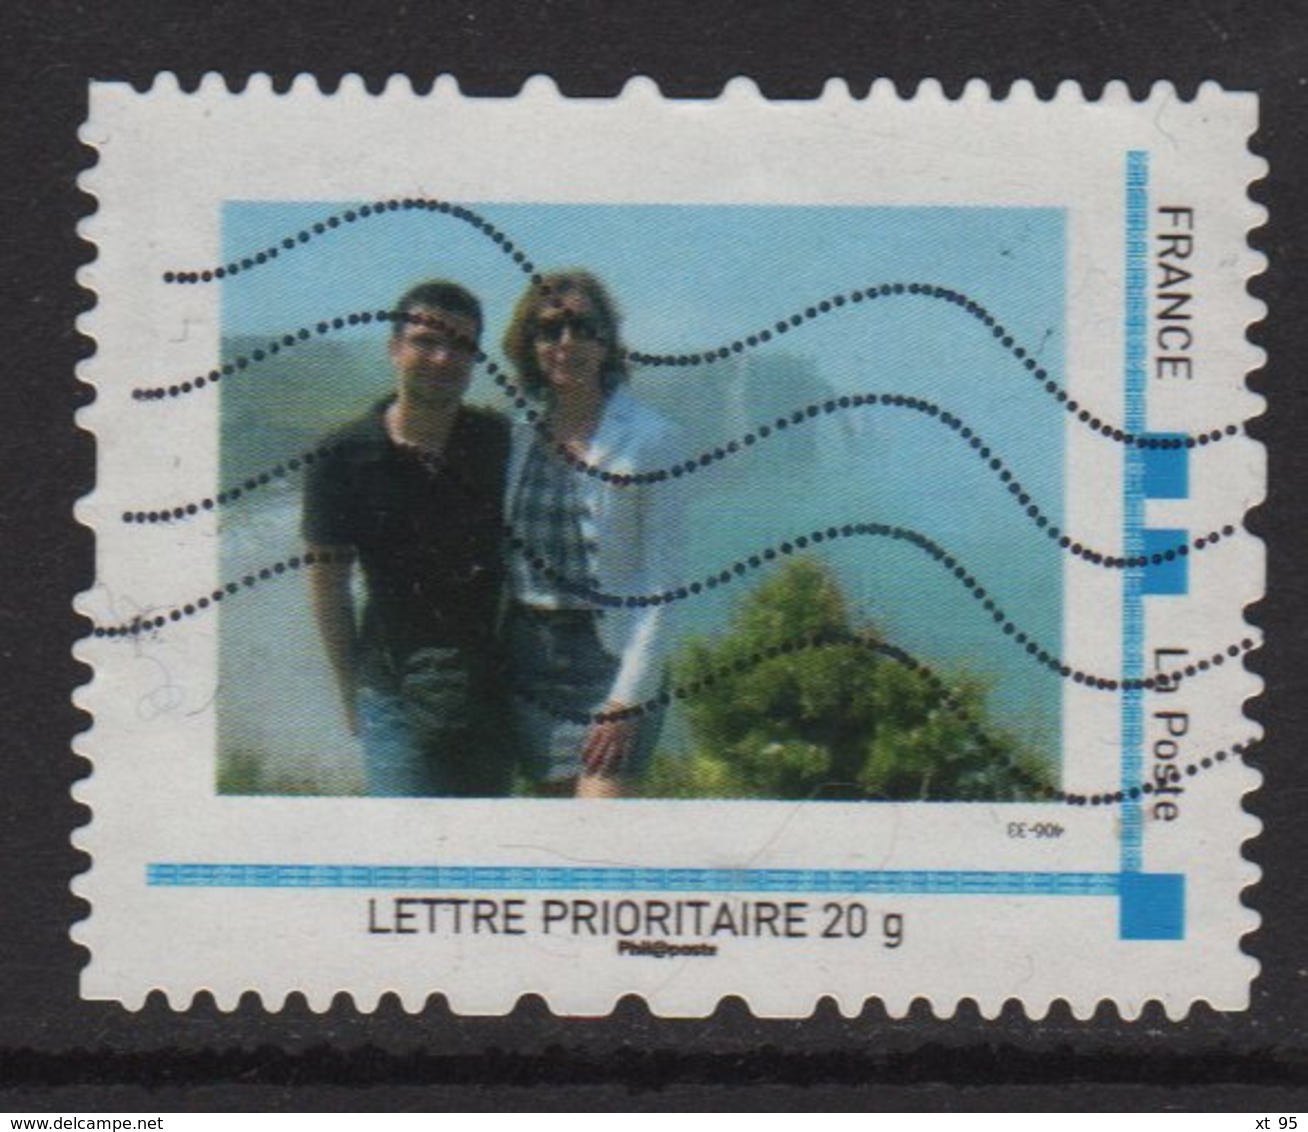 Timbre Personnalise Oblitere - Lettre Prioritaire 20g - Etretat - Used Stamps